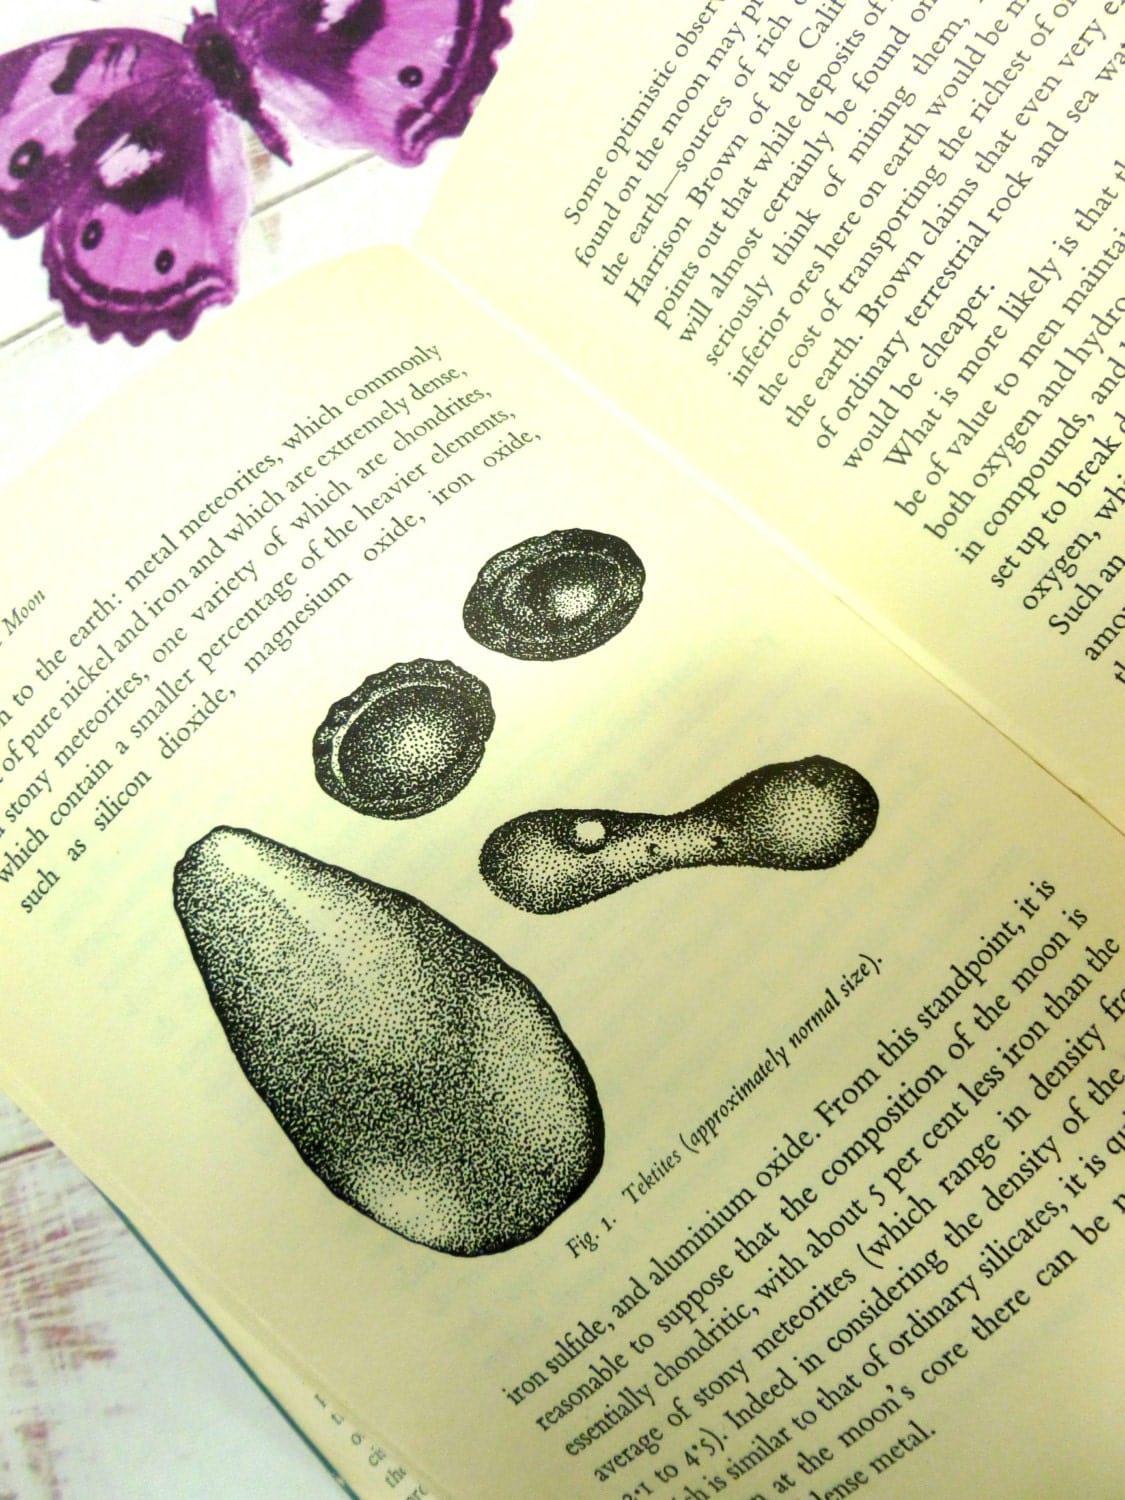 Black and white diagrammatical illustrations of Tektites in vintage hardback book from the 1960's Exploration of the Moon.